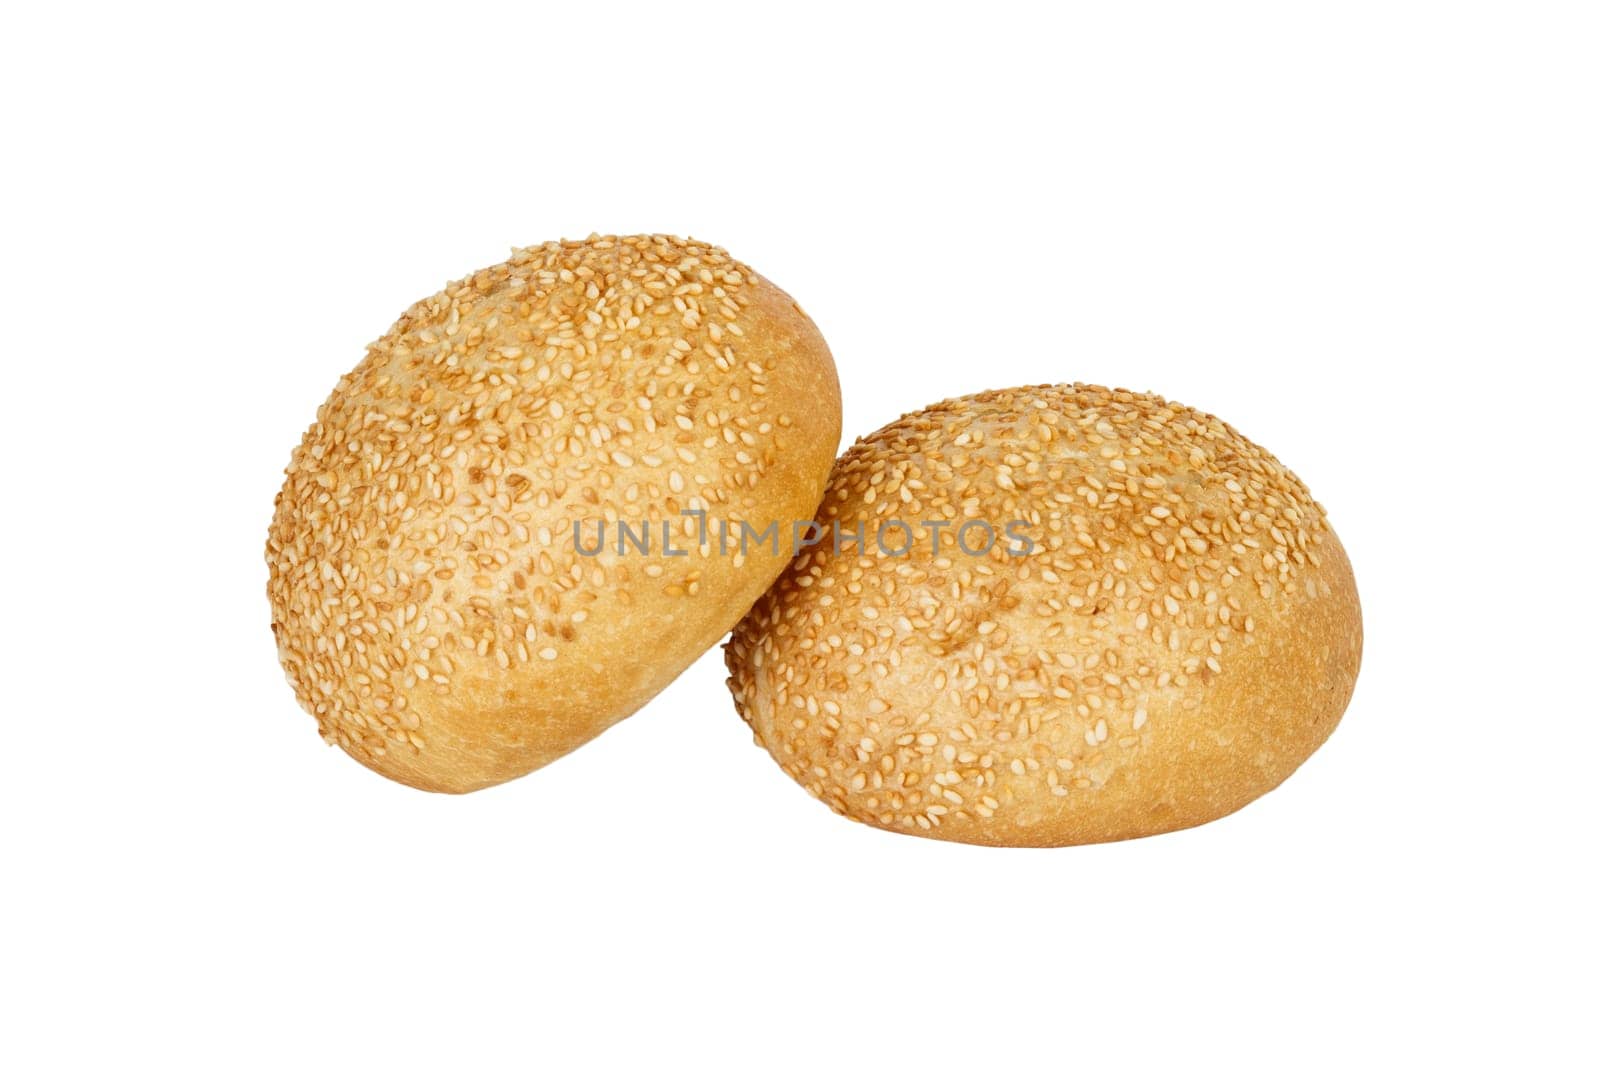 Two Tasty fresh round bun with sesame seeds for burger on white background by Snegok1967